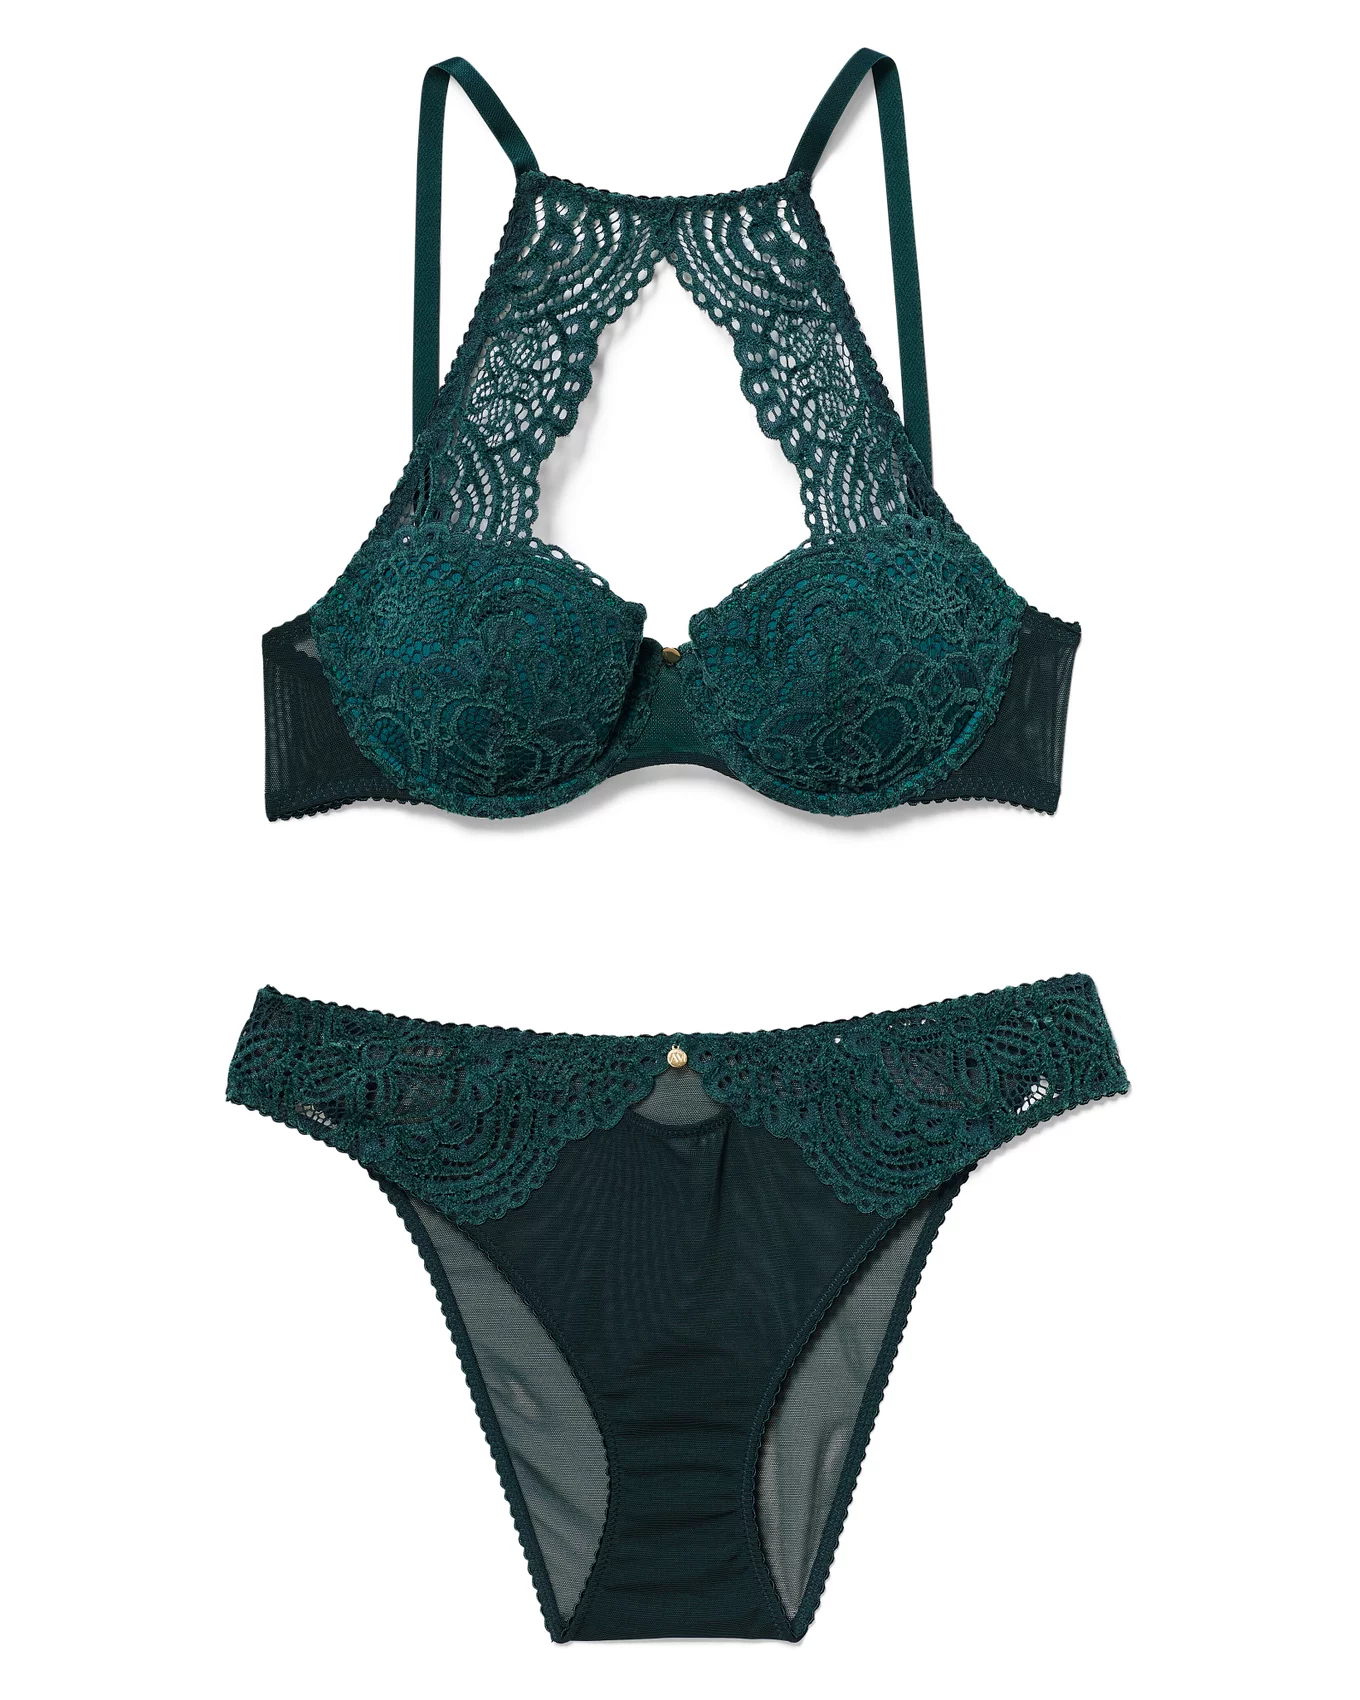 Velour cotton lingerie emerald green set with lace panties and bra